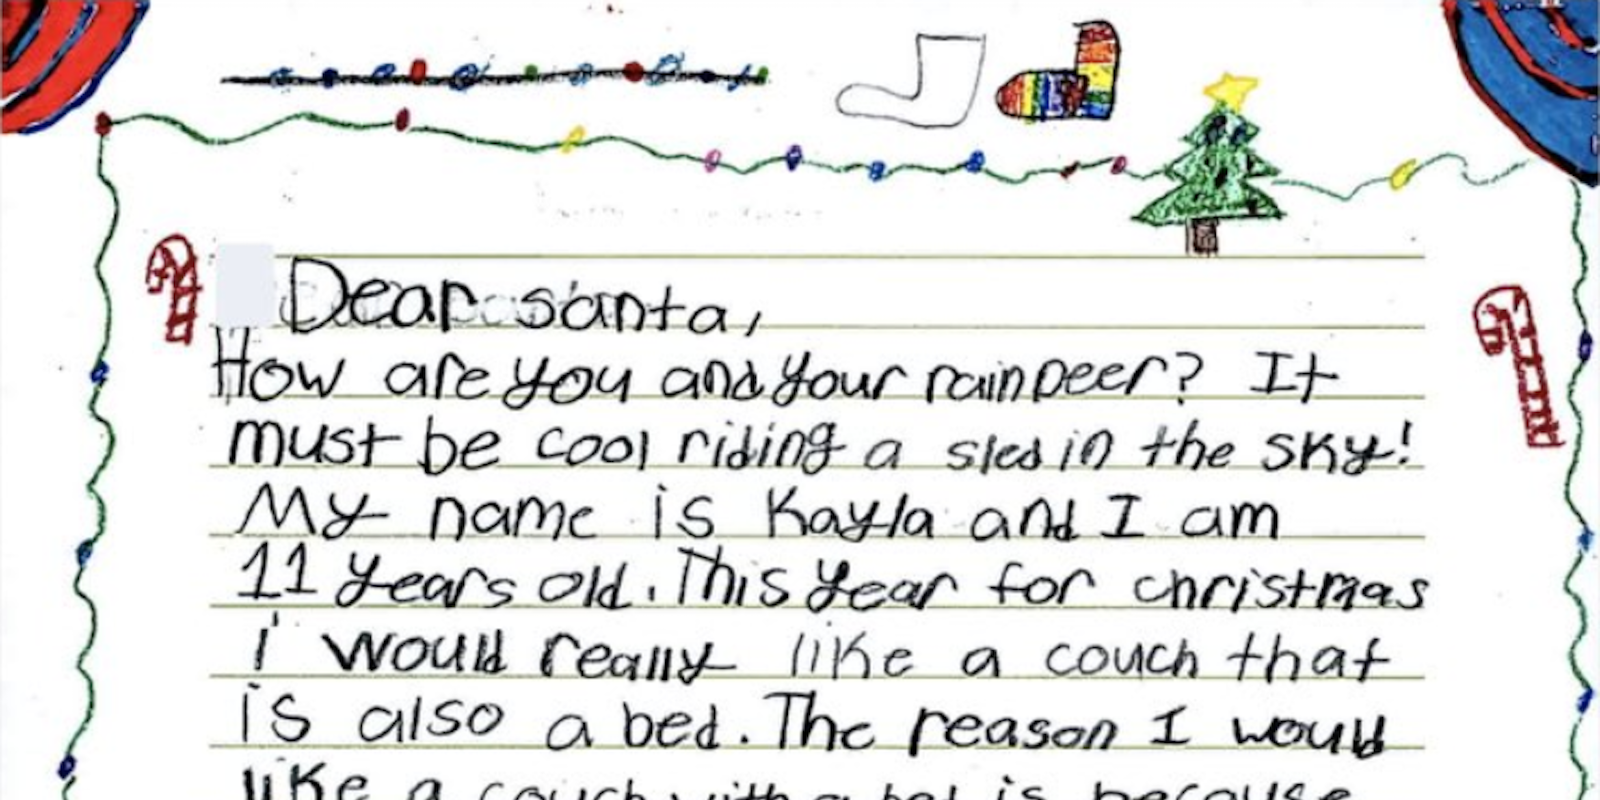 Image of a handwritten letter to Santa